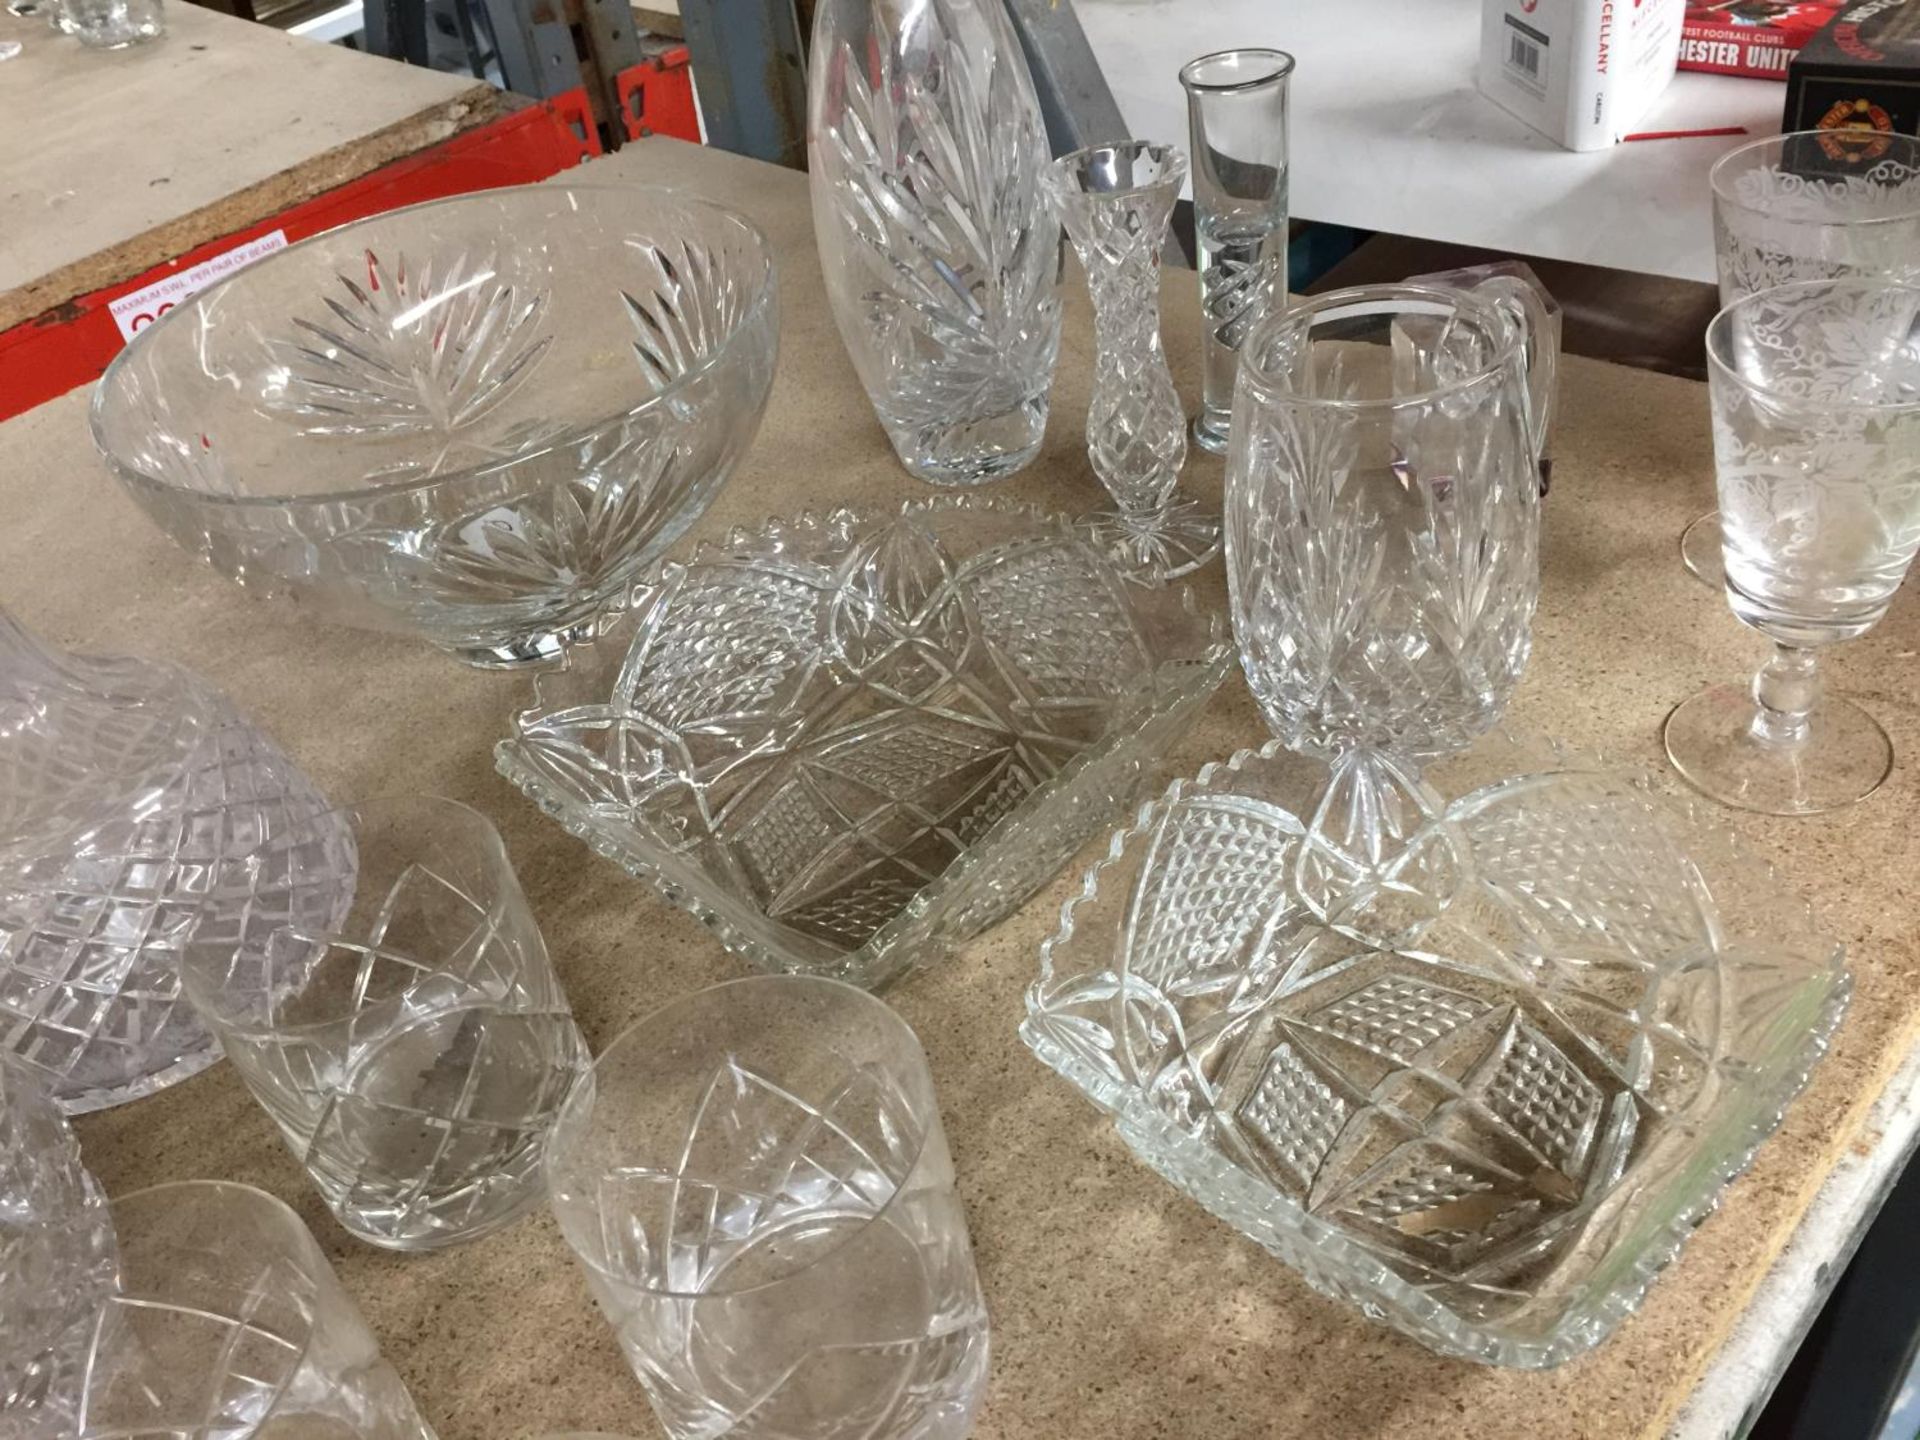 AN ASSORTMENT OF GLASSWARE TO INCLUDE DECANTERS, BOWLS, VASES, GLASSES, ETC - Image 3 of 7